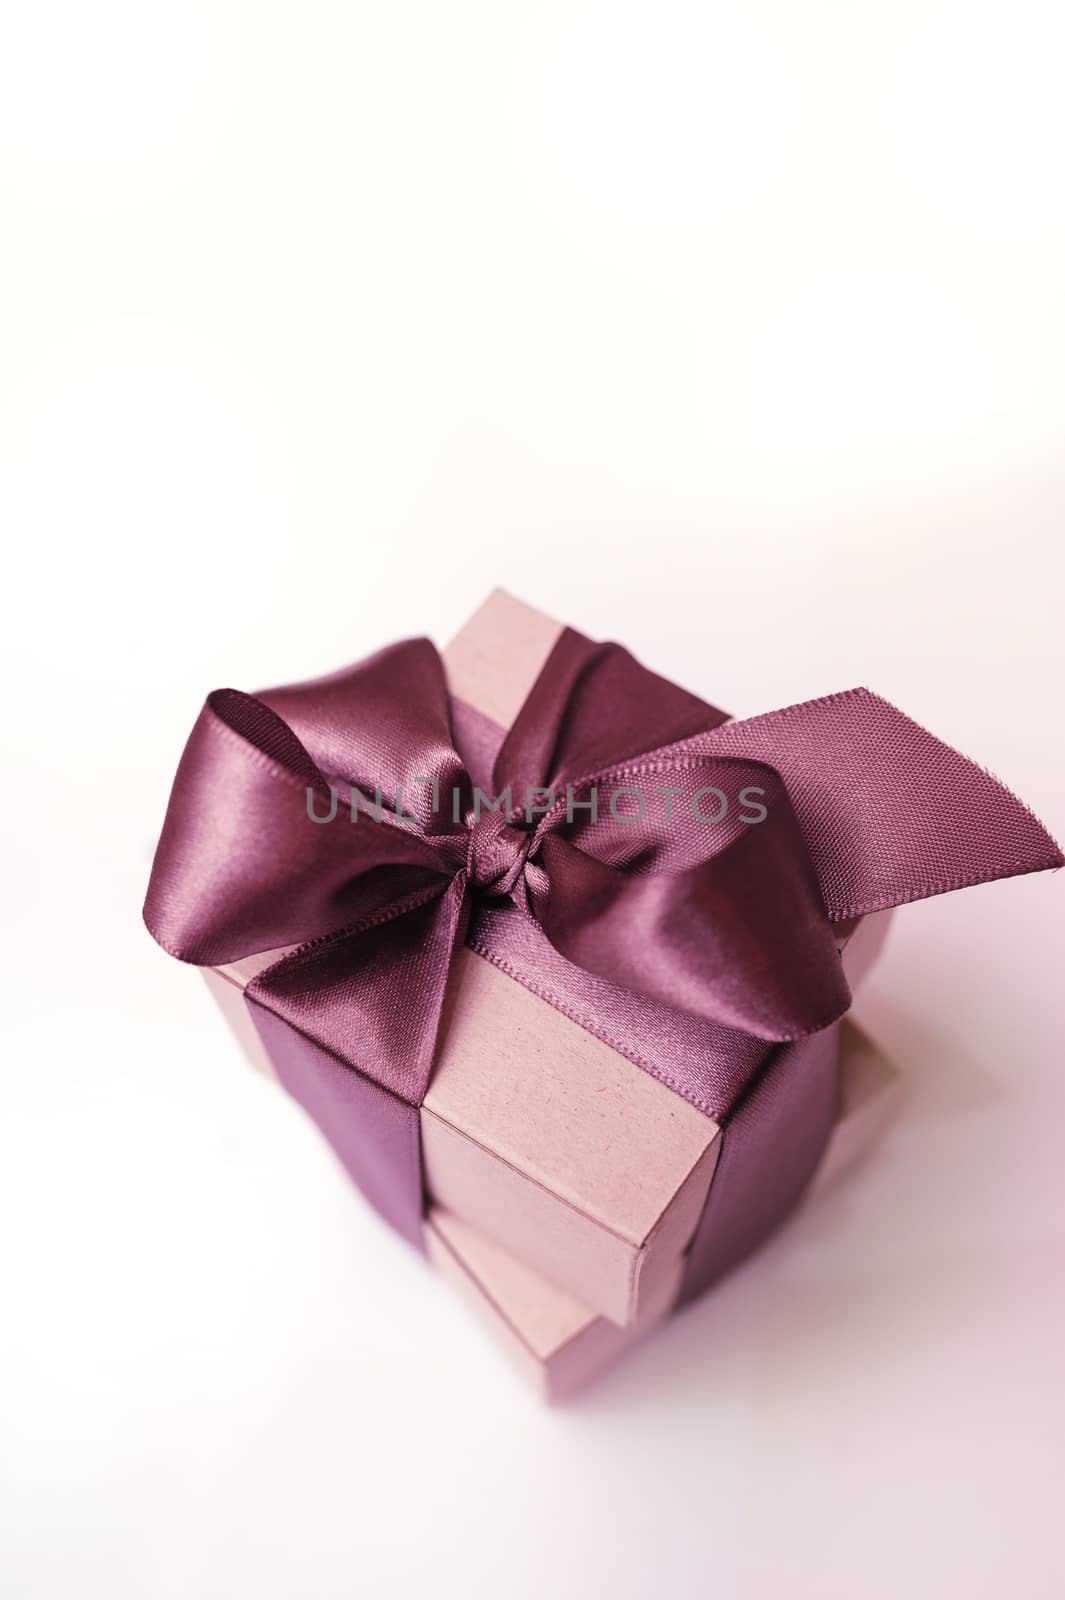 gift box of kraft paper with brown ribbon.